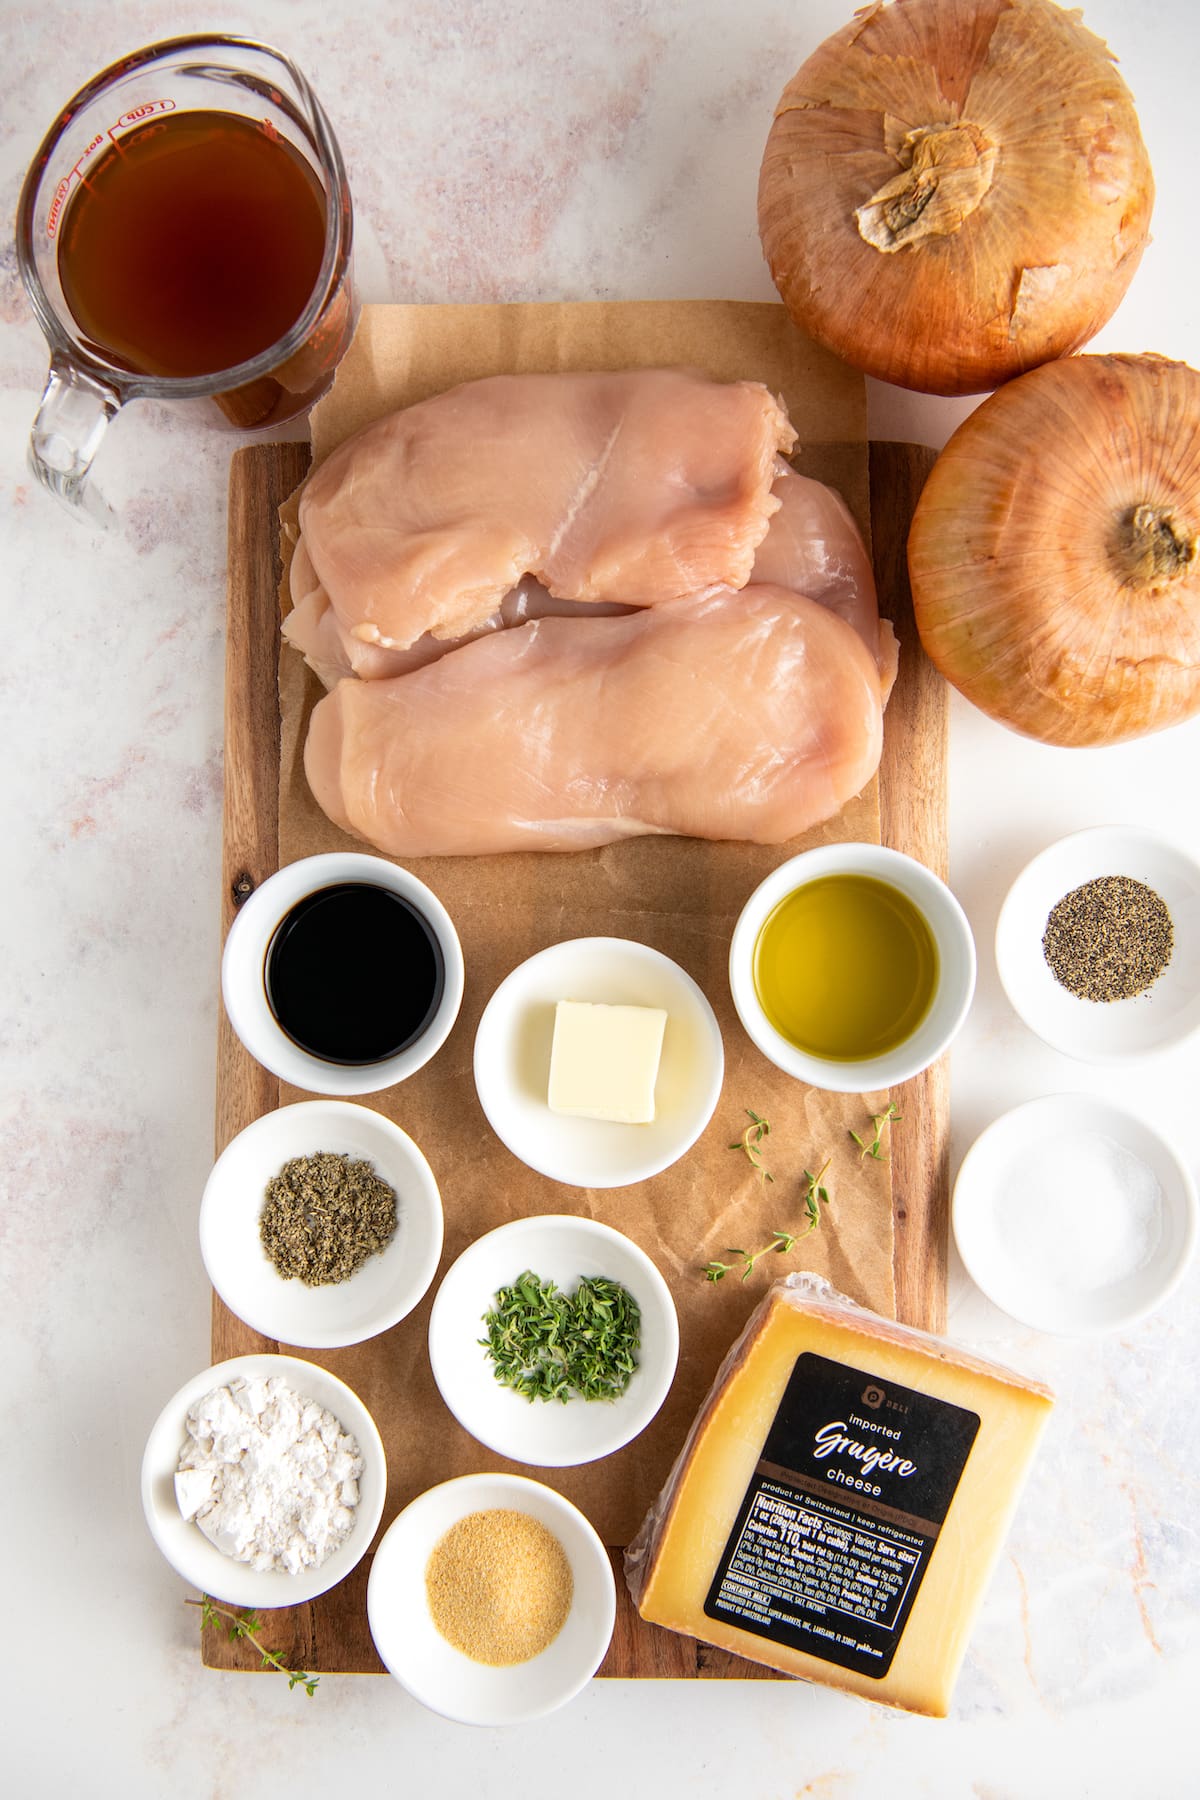 Overhead view of the ingredients needed for French onion chicken: chicken breasts, onions, a bowl of oil, a bowl of butter, a bowl of balsamic vinegar, a bowl of flour, a bowl of garlic powder, a bowl of pepper, a block of gruyere, a bowl of salt, a bowl of fresh thyme, a bowl of dried sage, and a pyrex of beef broth